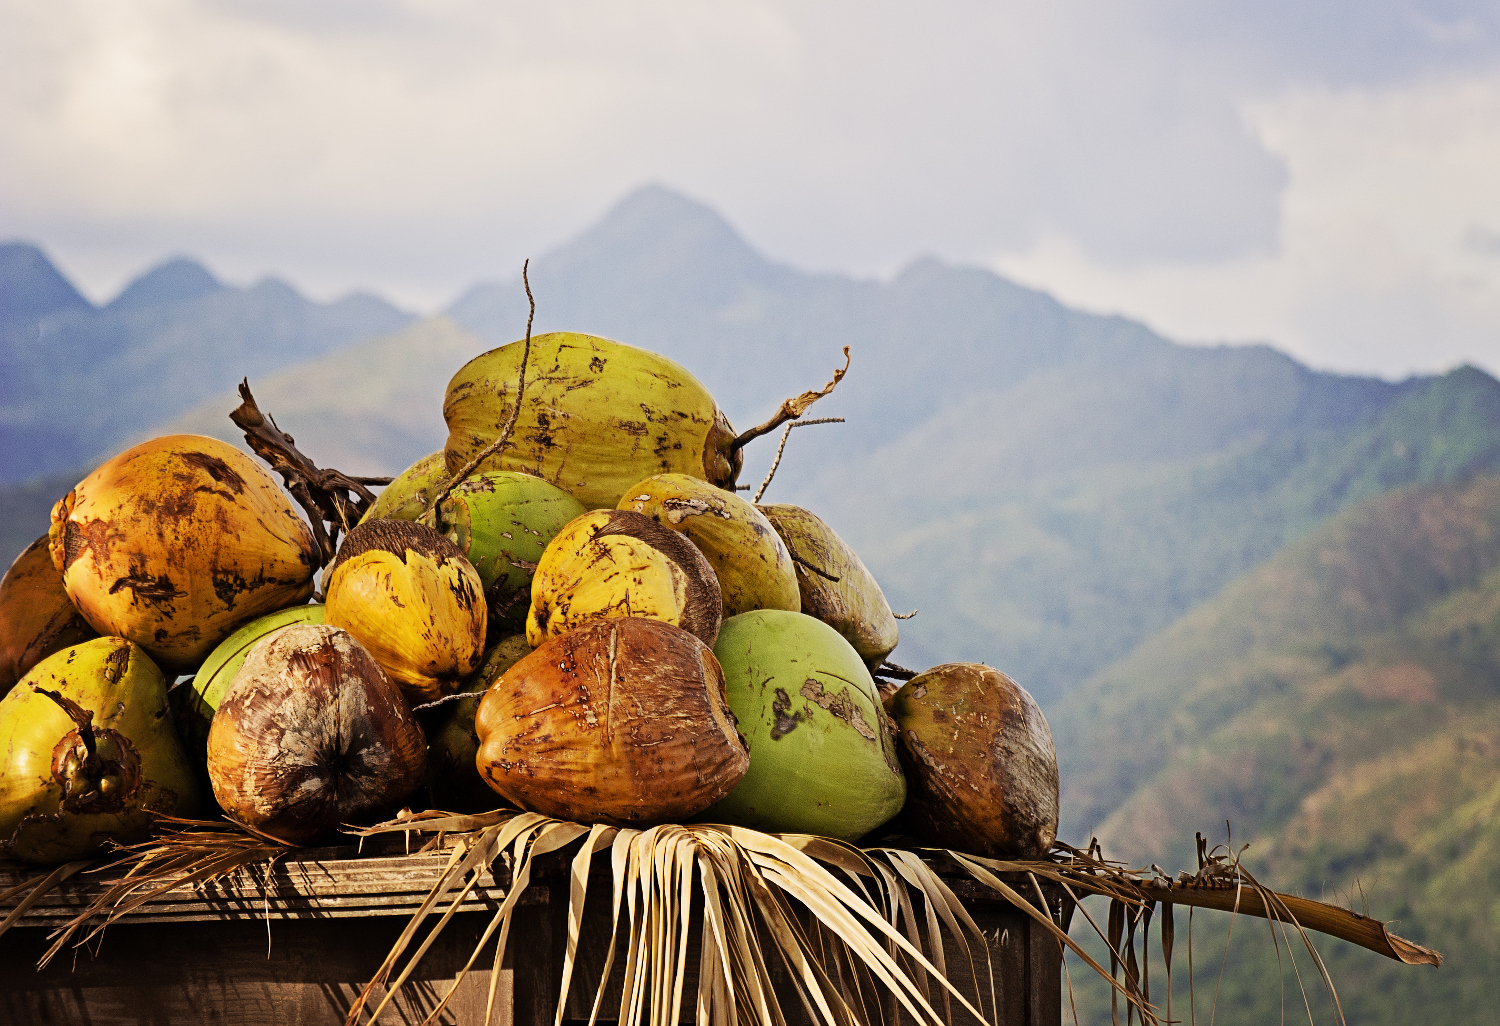 Fresh air and fresh produce is a perfect recipe in the Caribbean. Image by Karen Brodie / Moment / Getty